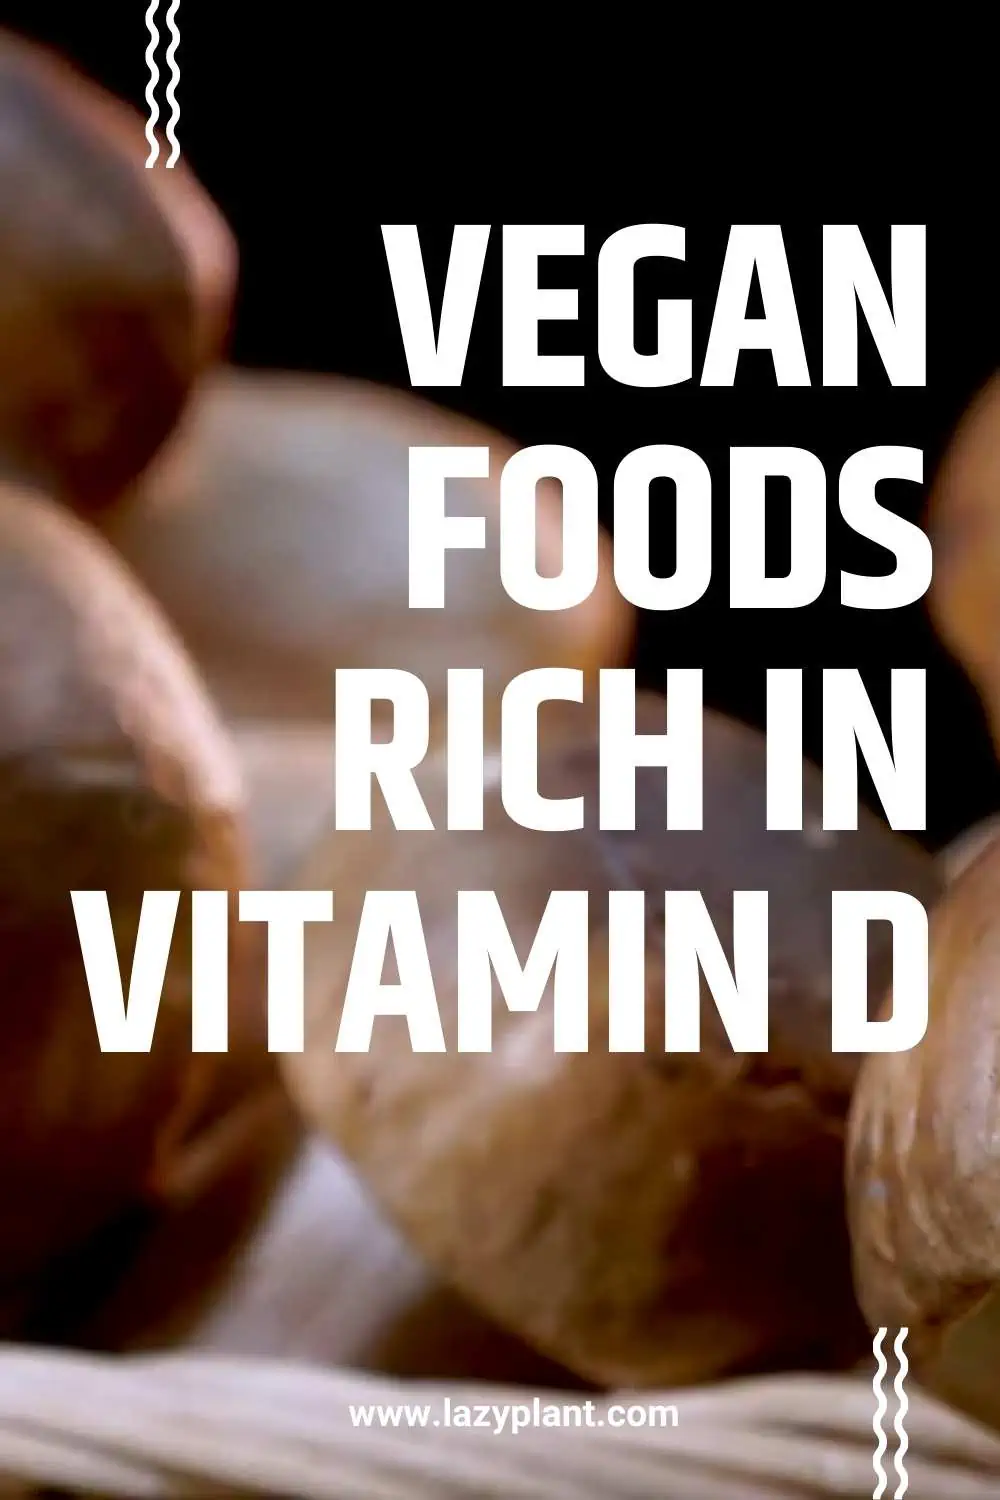 A list of common vegan foods with vitamin D.